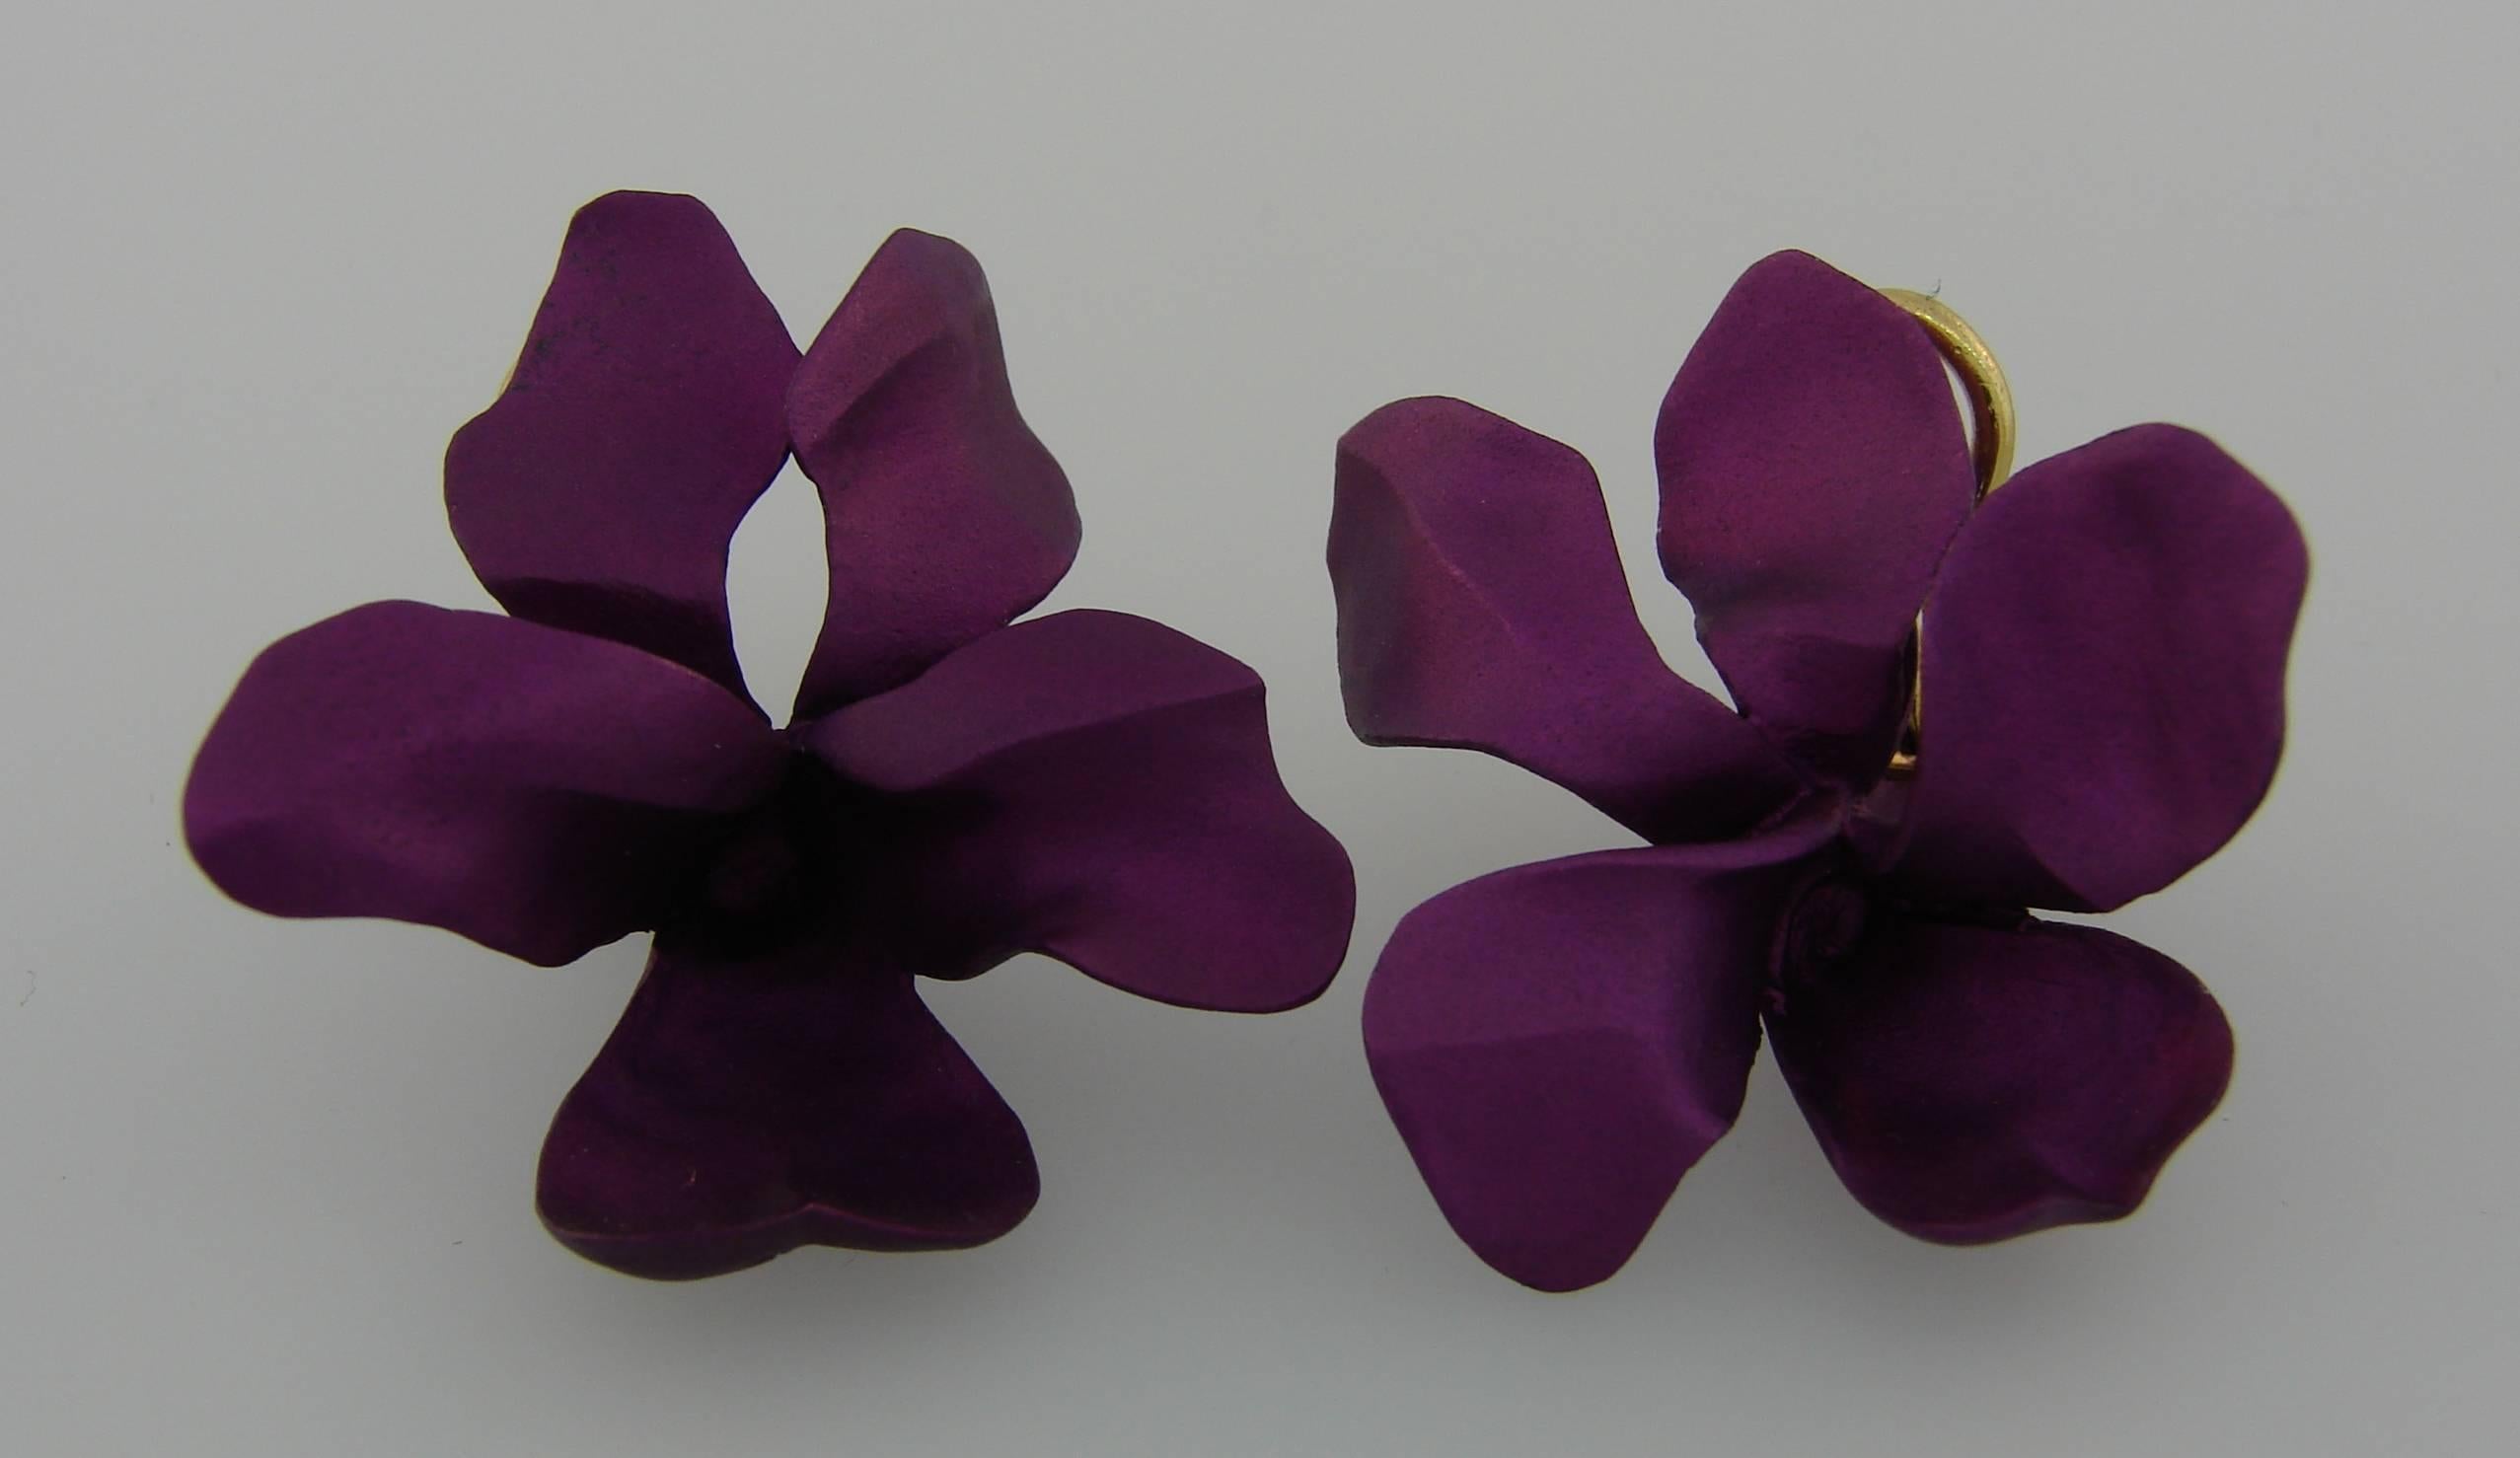 Signature flower earrings created by JAR. Feminine, sculptural, wearable and chic, the earrings are a great addition to your jewelry collection. 
The earrings are made of titanium and have 18 karat yellow gold clasps. They measure 1.25 x 1.25 inches